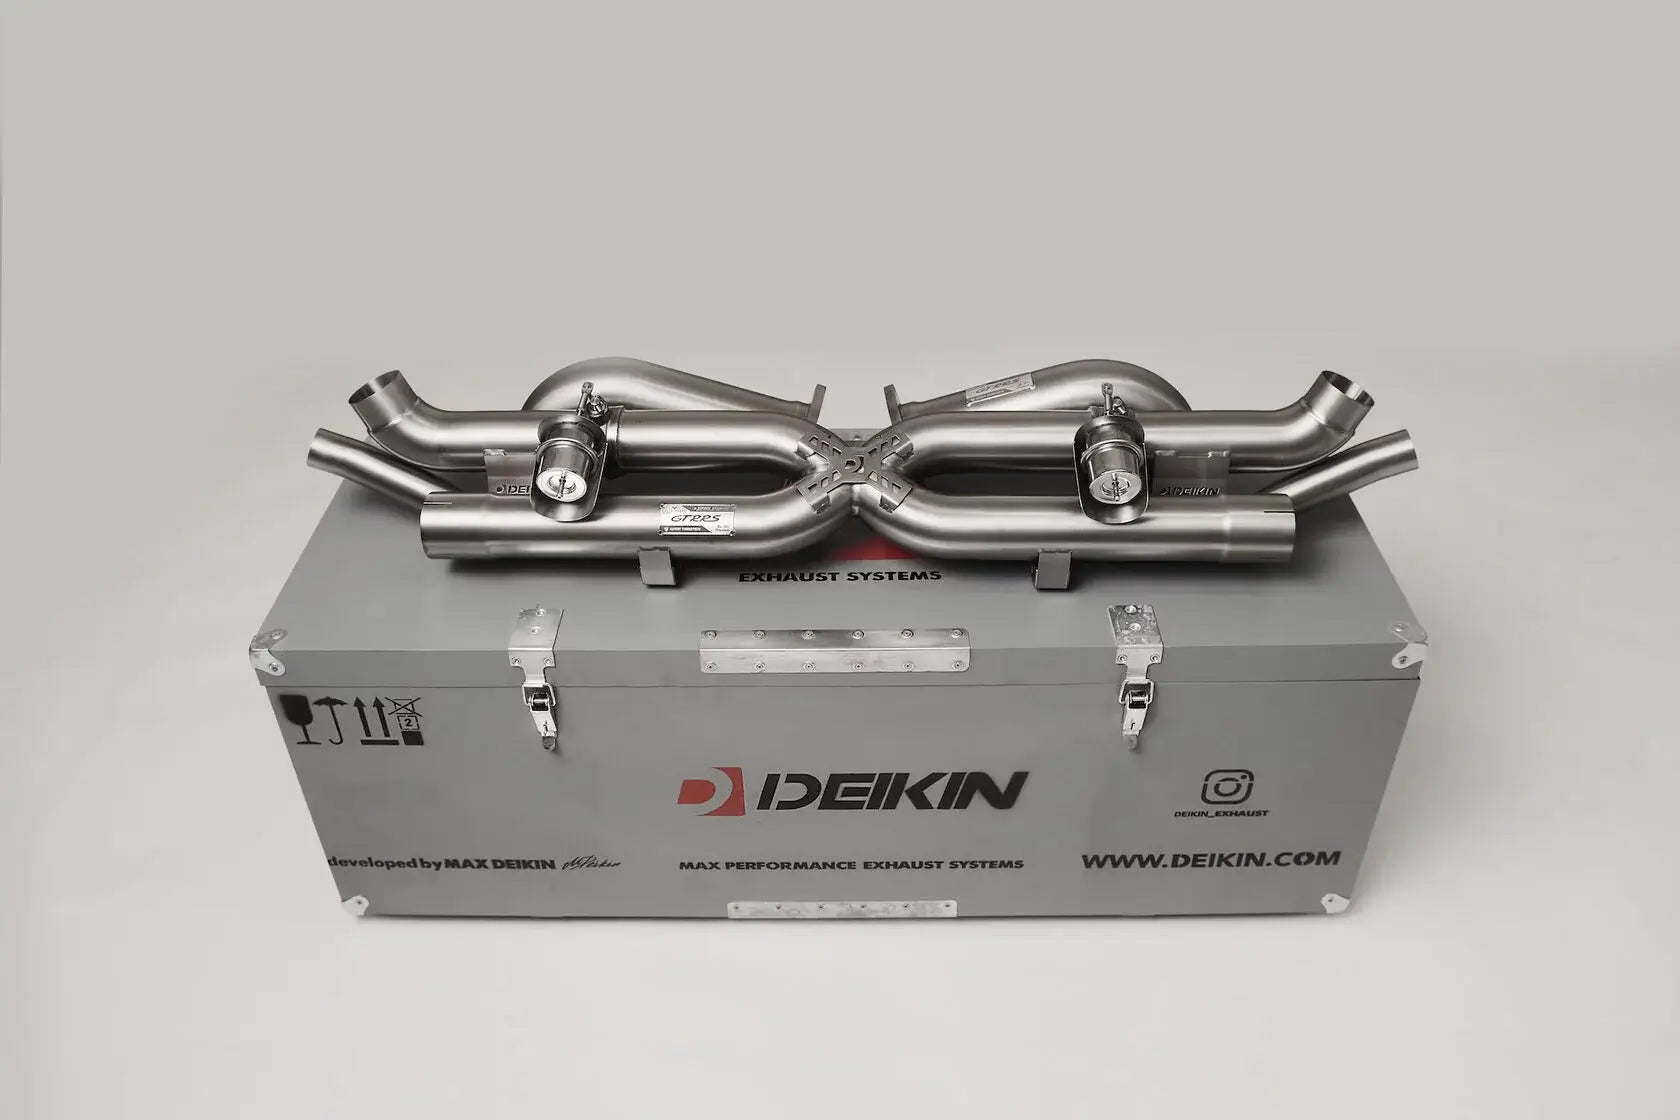 DEIKIN 10-PO.911.T/TS.991.2/R-ES-Ti-00 Exhaust system "Race" Titan for Porsche 911 Turbo/Turbo S (991.2) complete with downpipes without HeatShield Photo-1 